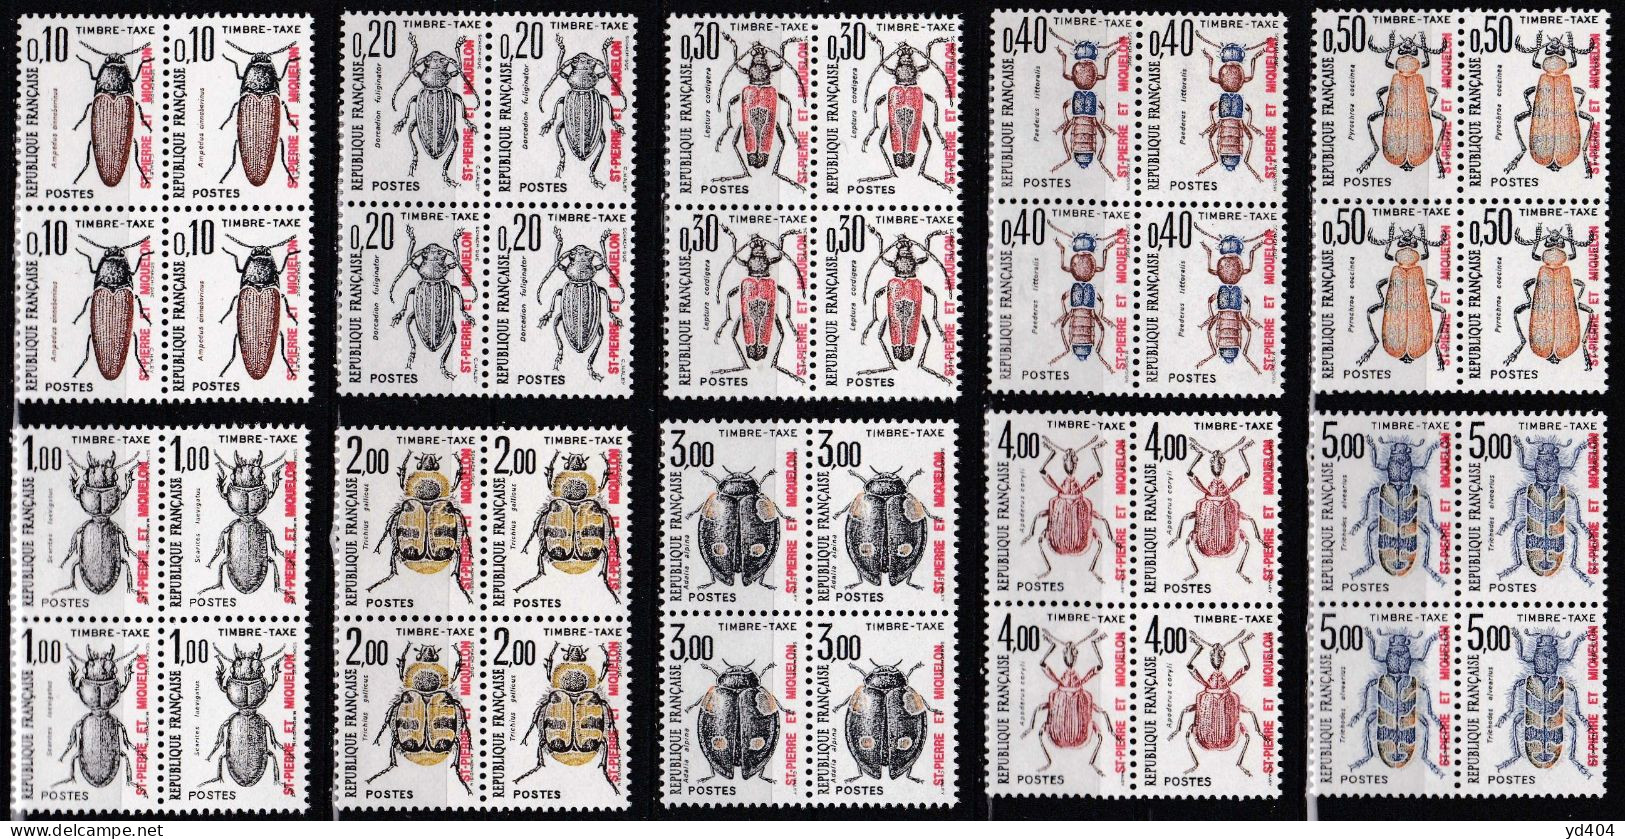 PM-660B – ST PIERRE & MIQUELON – POSTAGE DUE - 1986 – INSECTS – SG # D569/78(x4) MNH 106 € - Postage Due